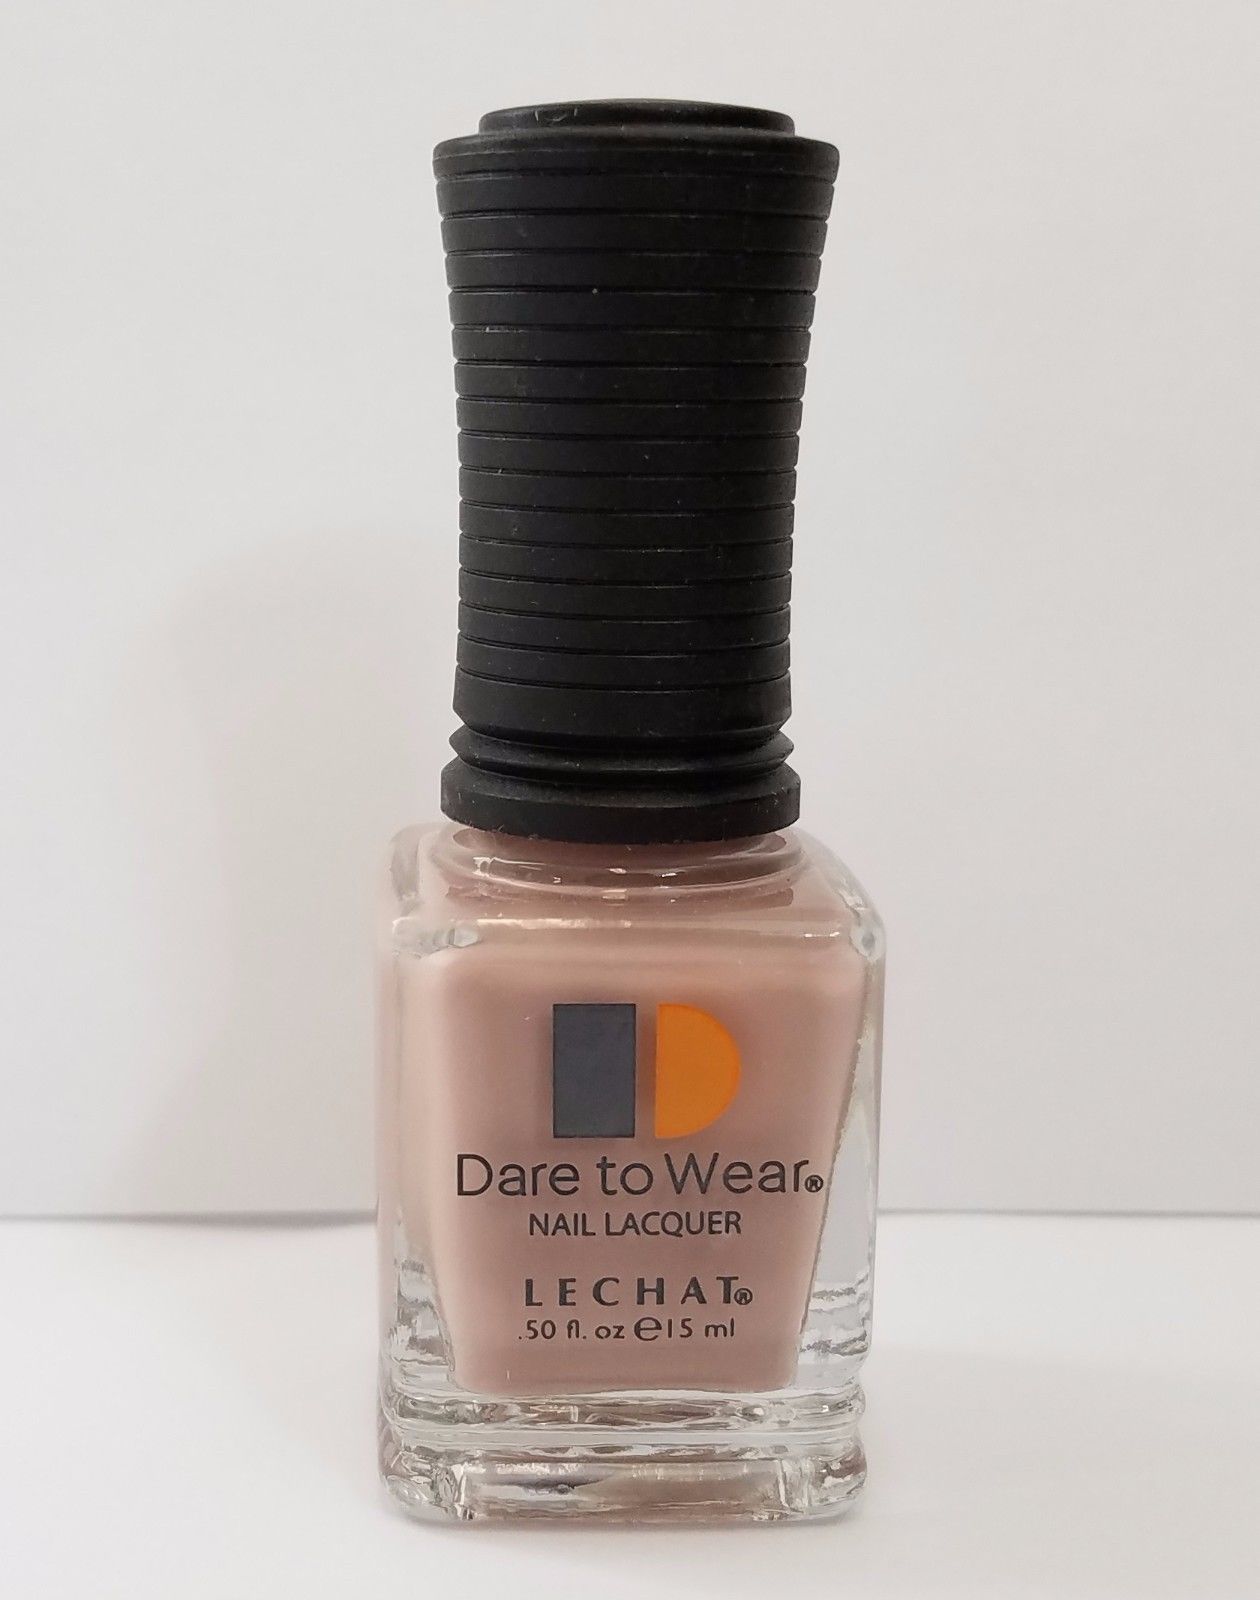 LECHAT Dare to Wear Nail Polish - 169 to 198 (Choose Your Favorite colors)